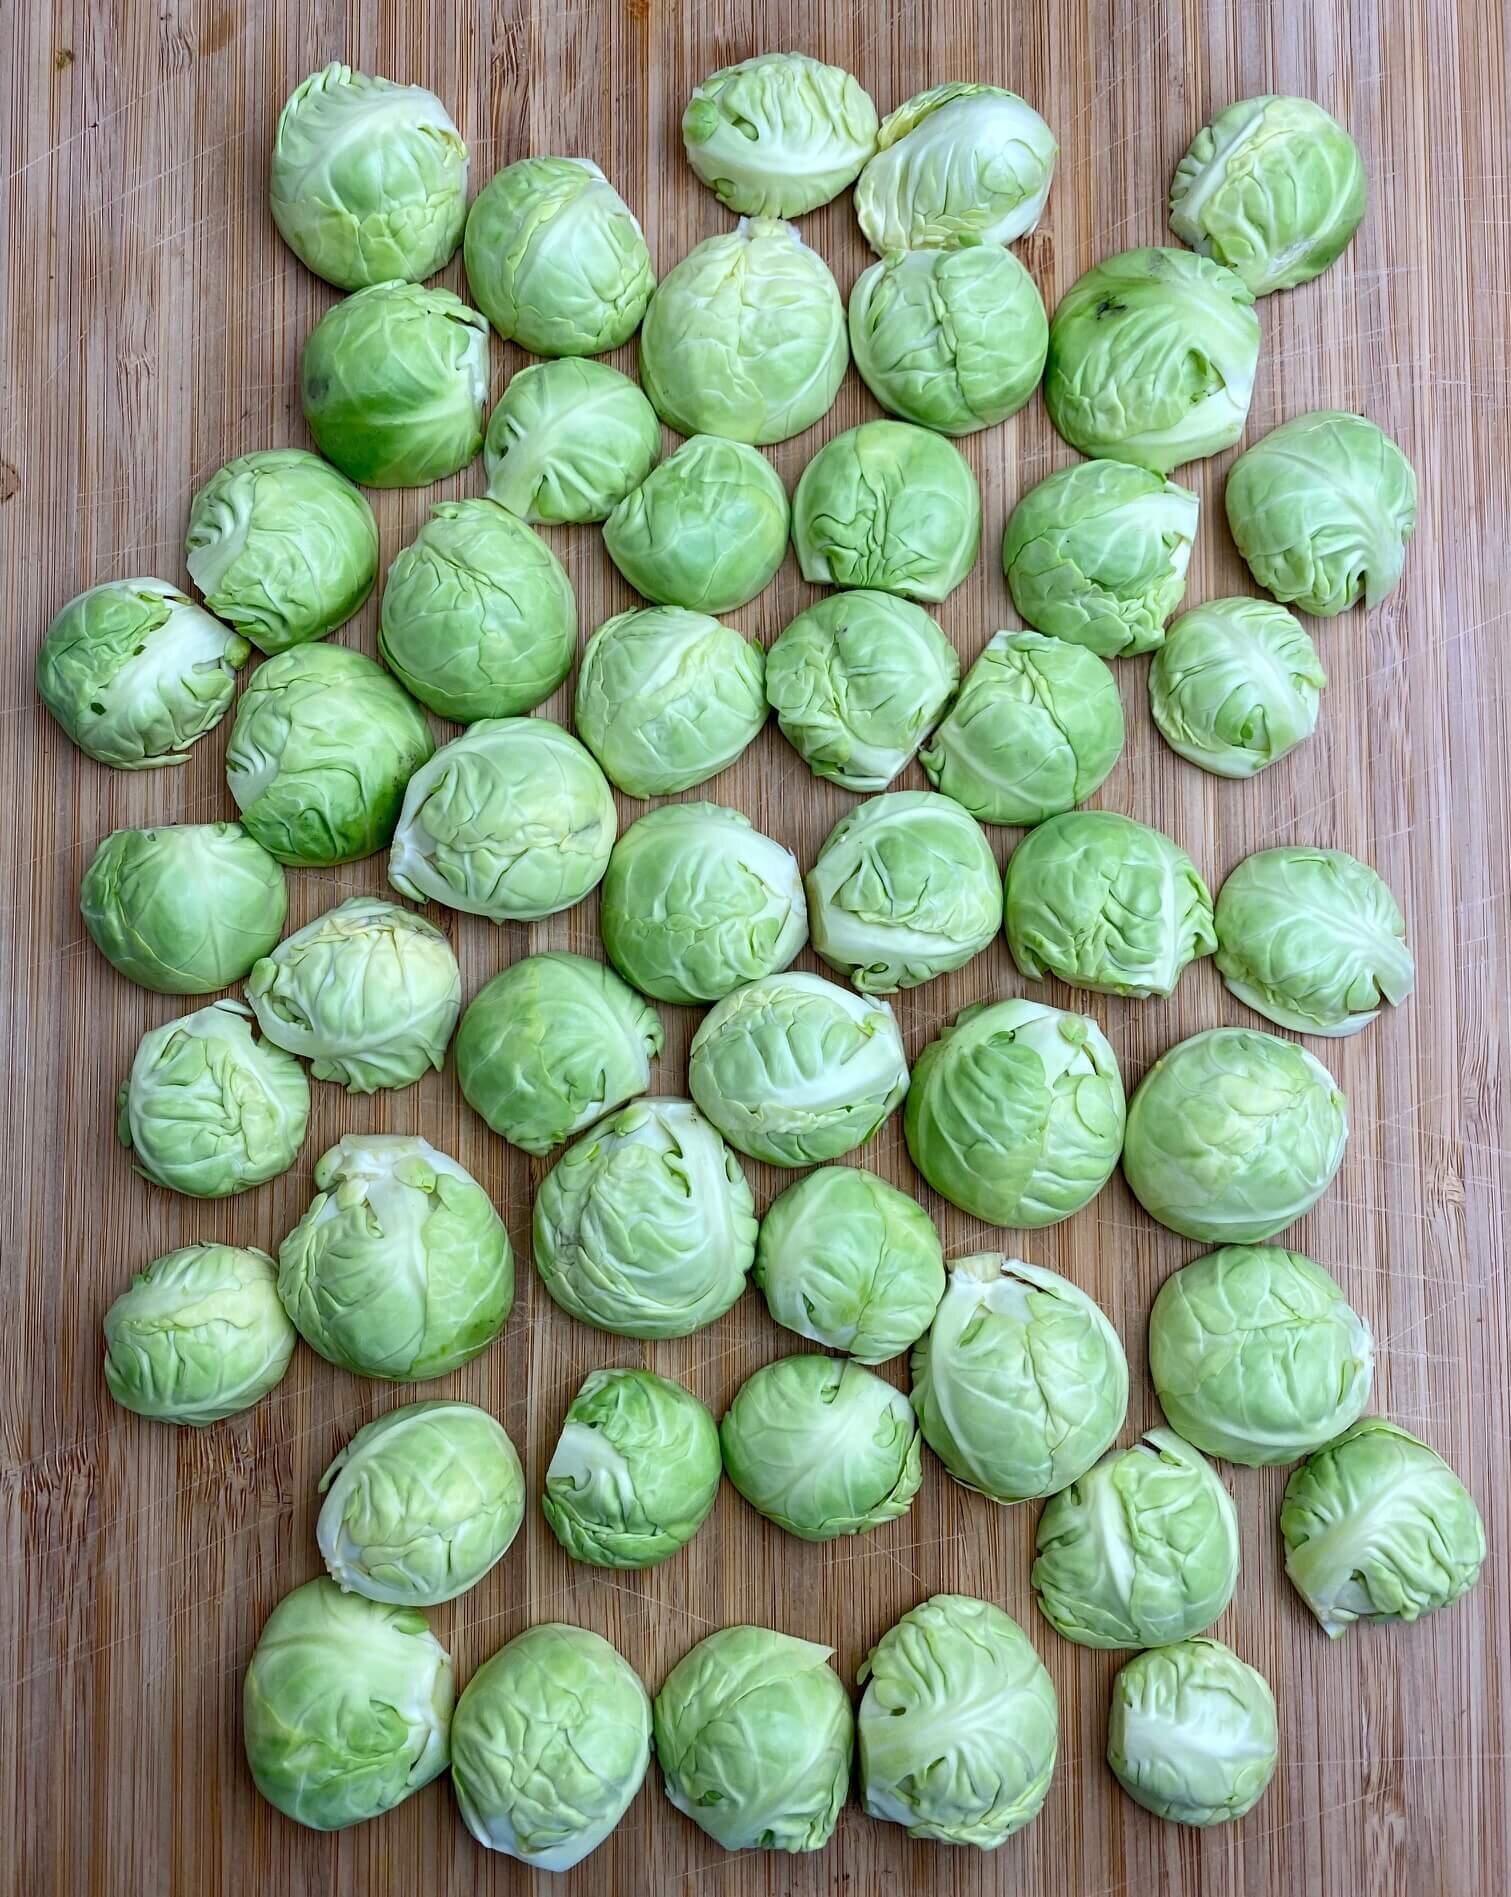 How to prepare brussel sprouts